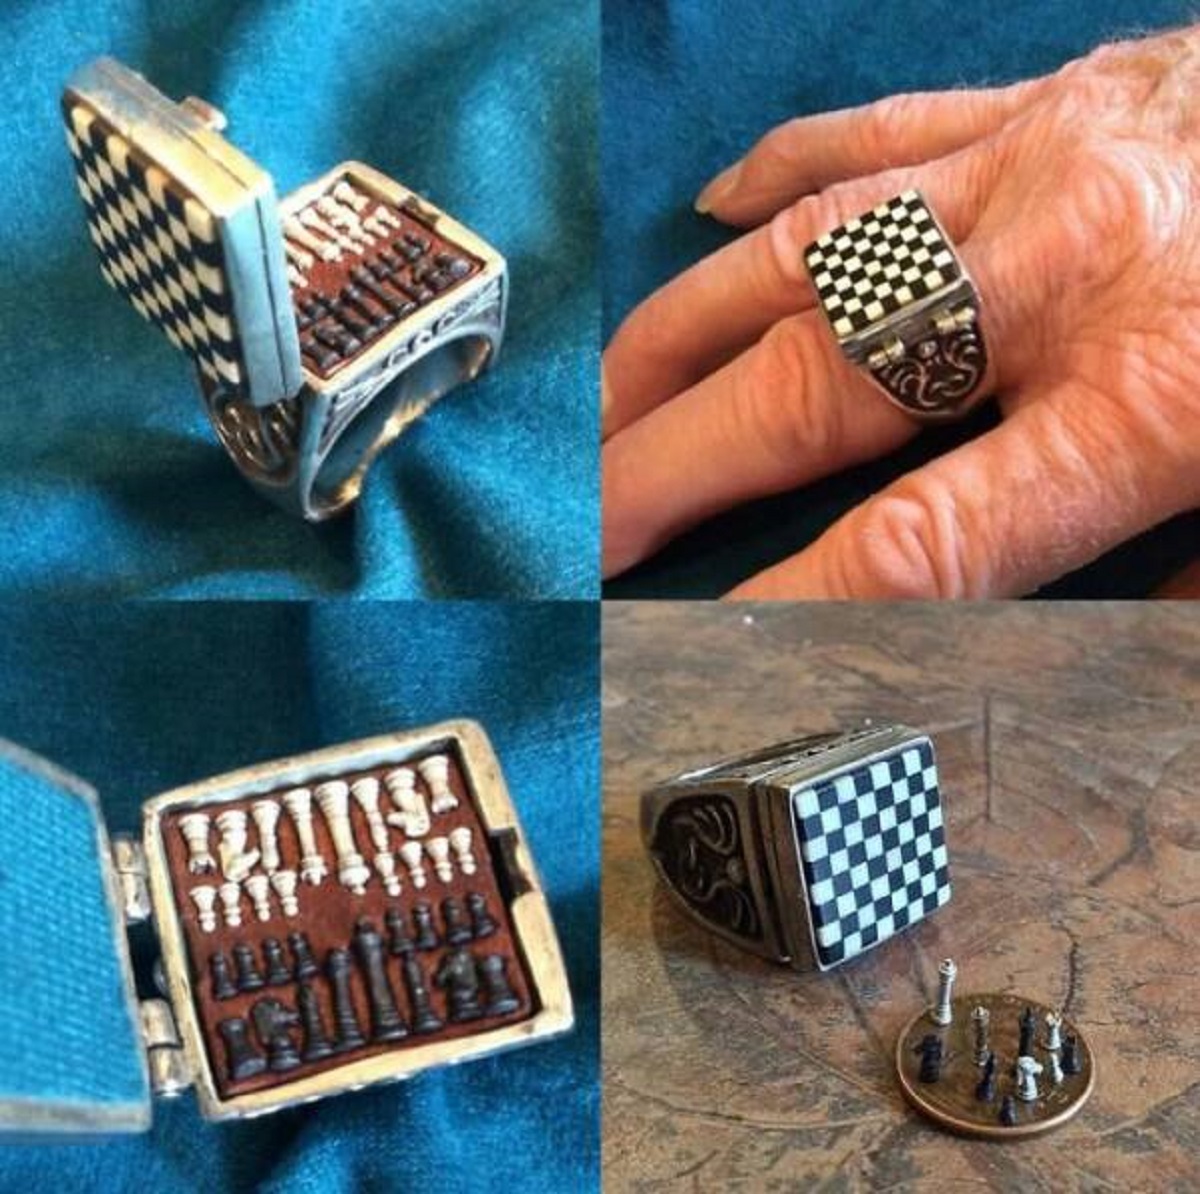 A ring-sized portable chessboard with pieces.